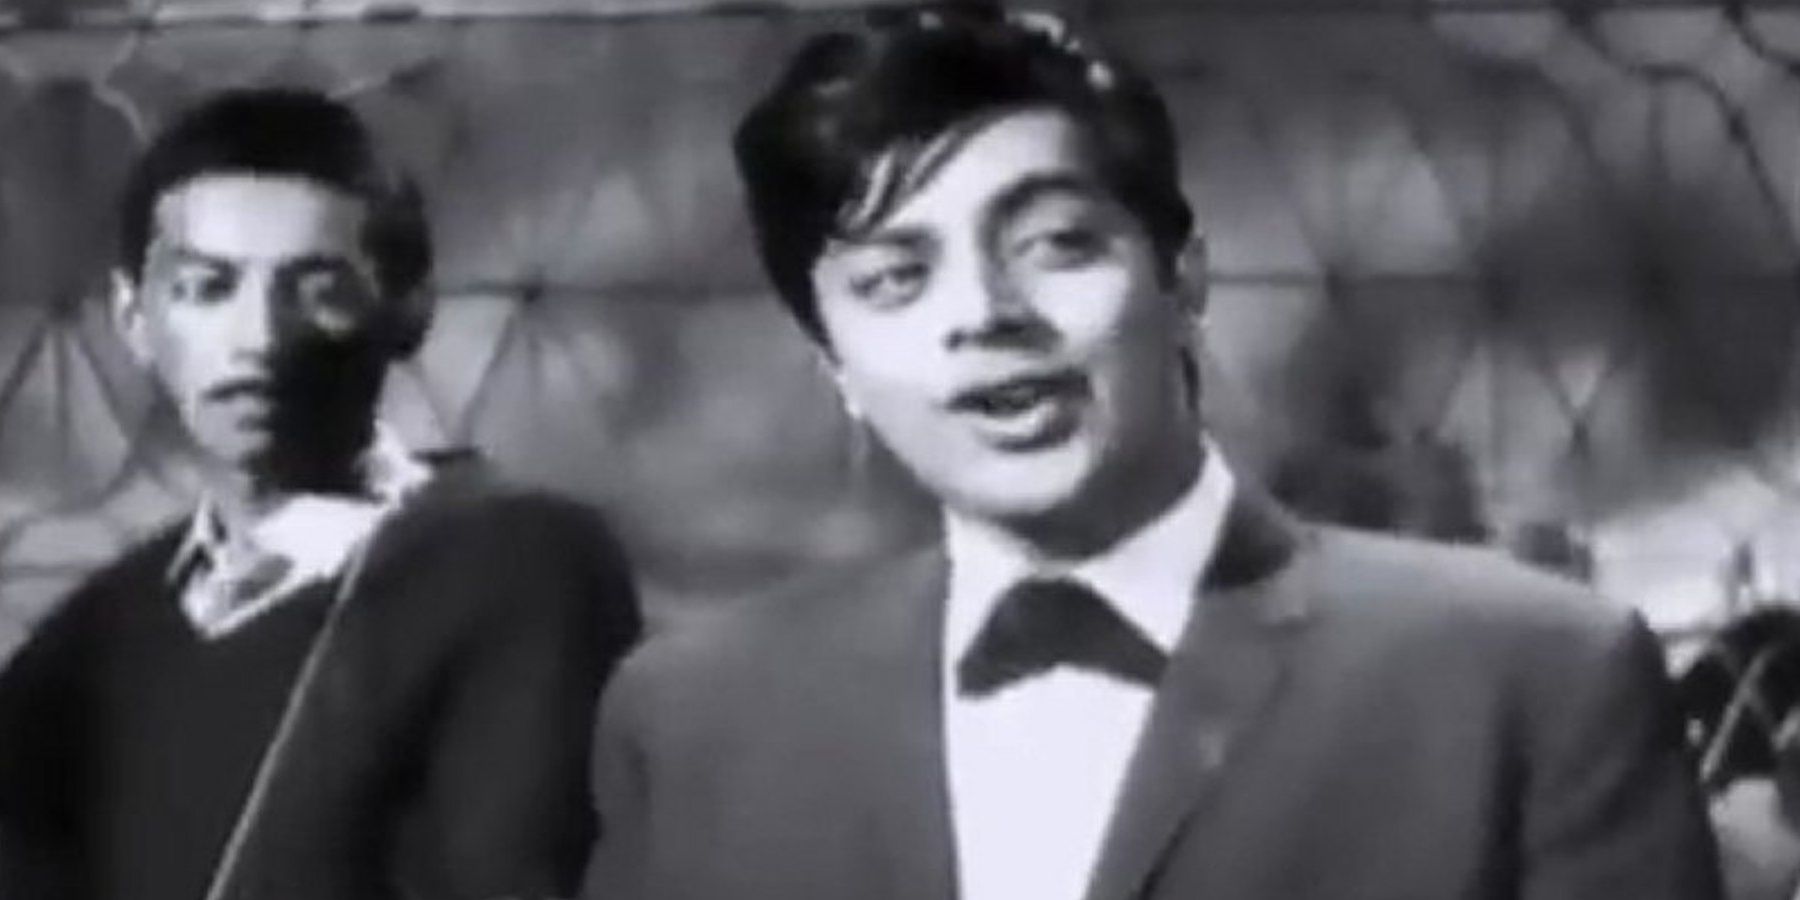 A man smiling and looking sideways in a still from the music video for Ko Ko Korina Cropped